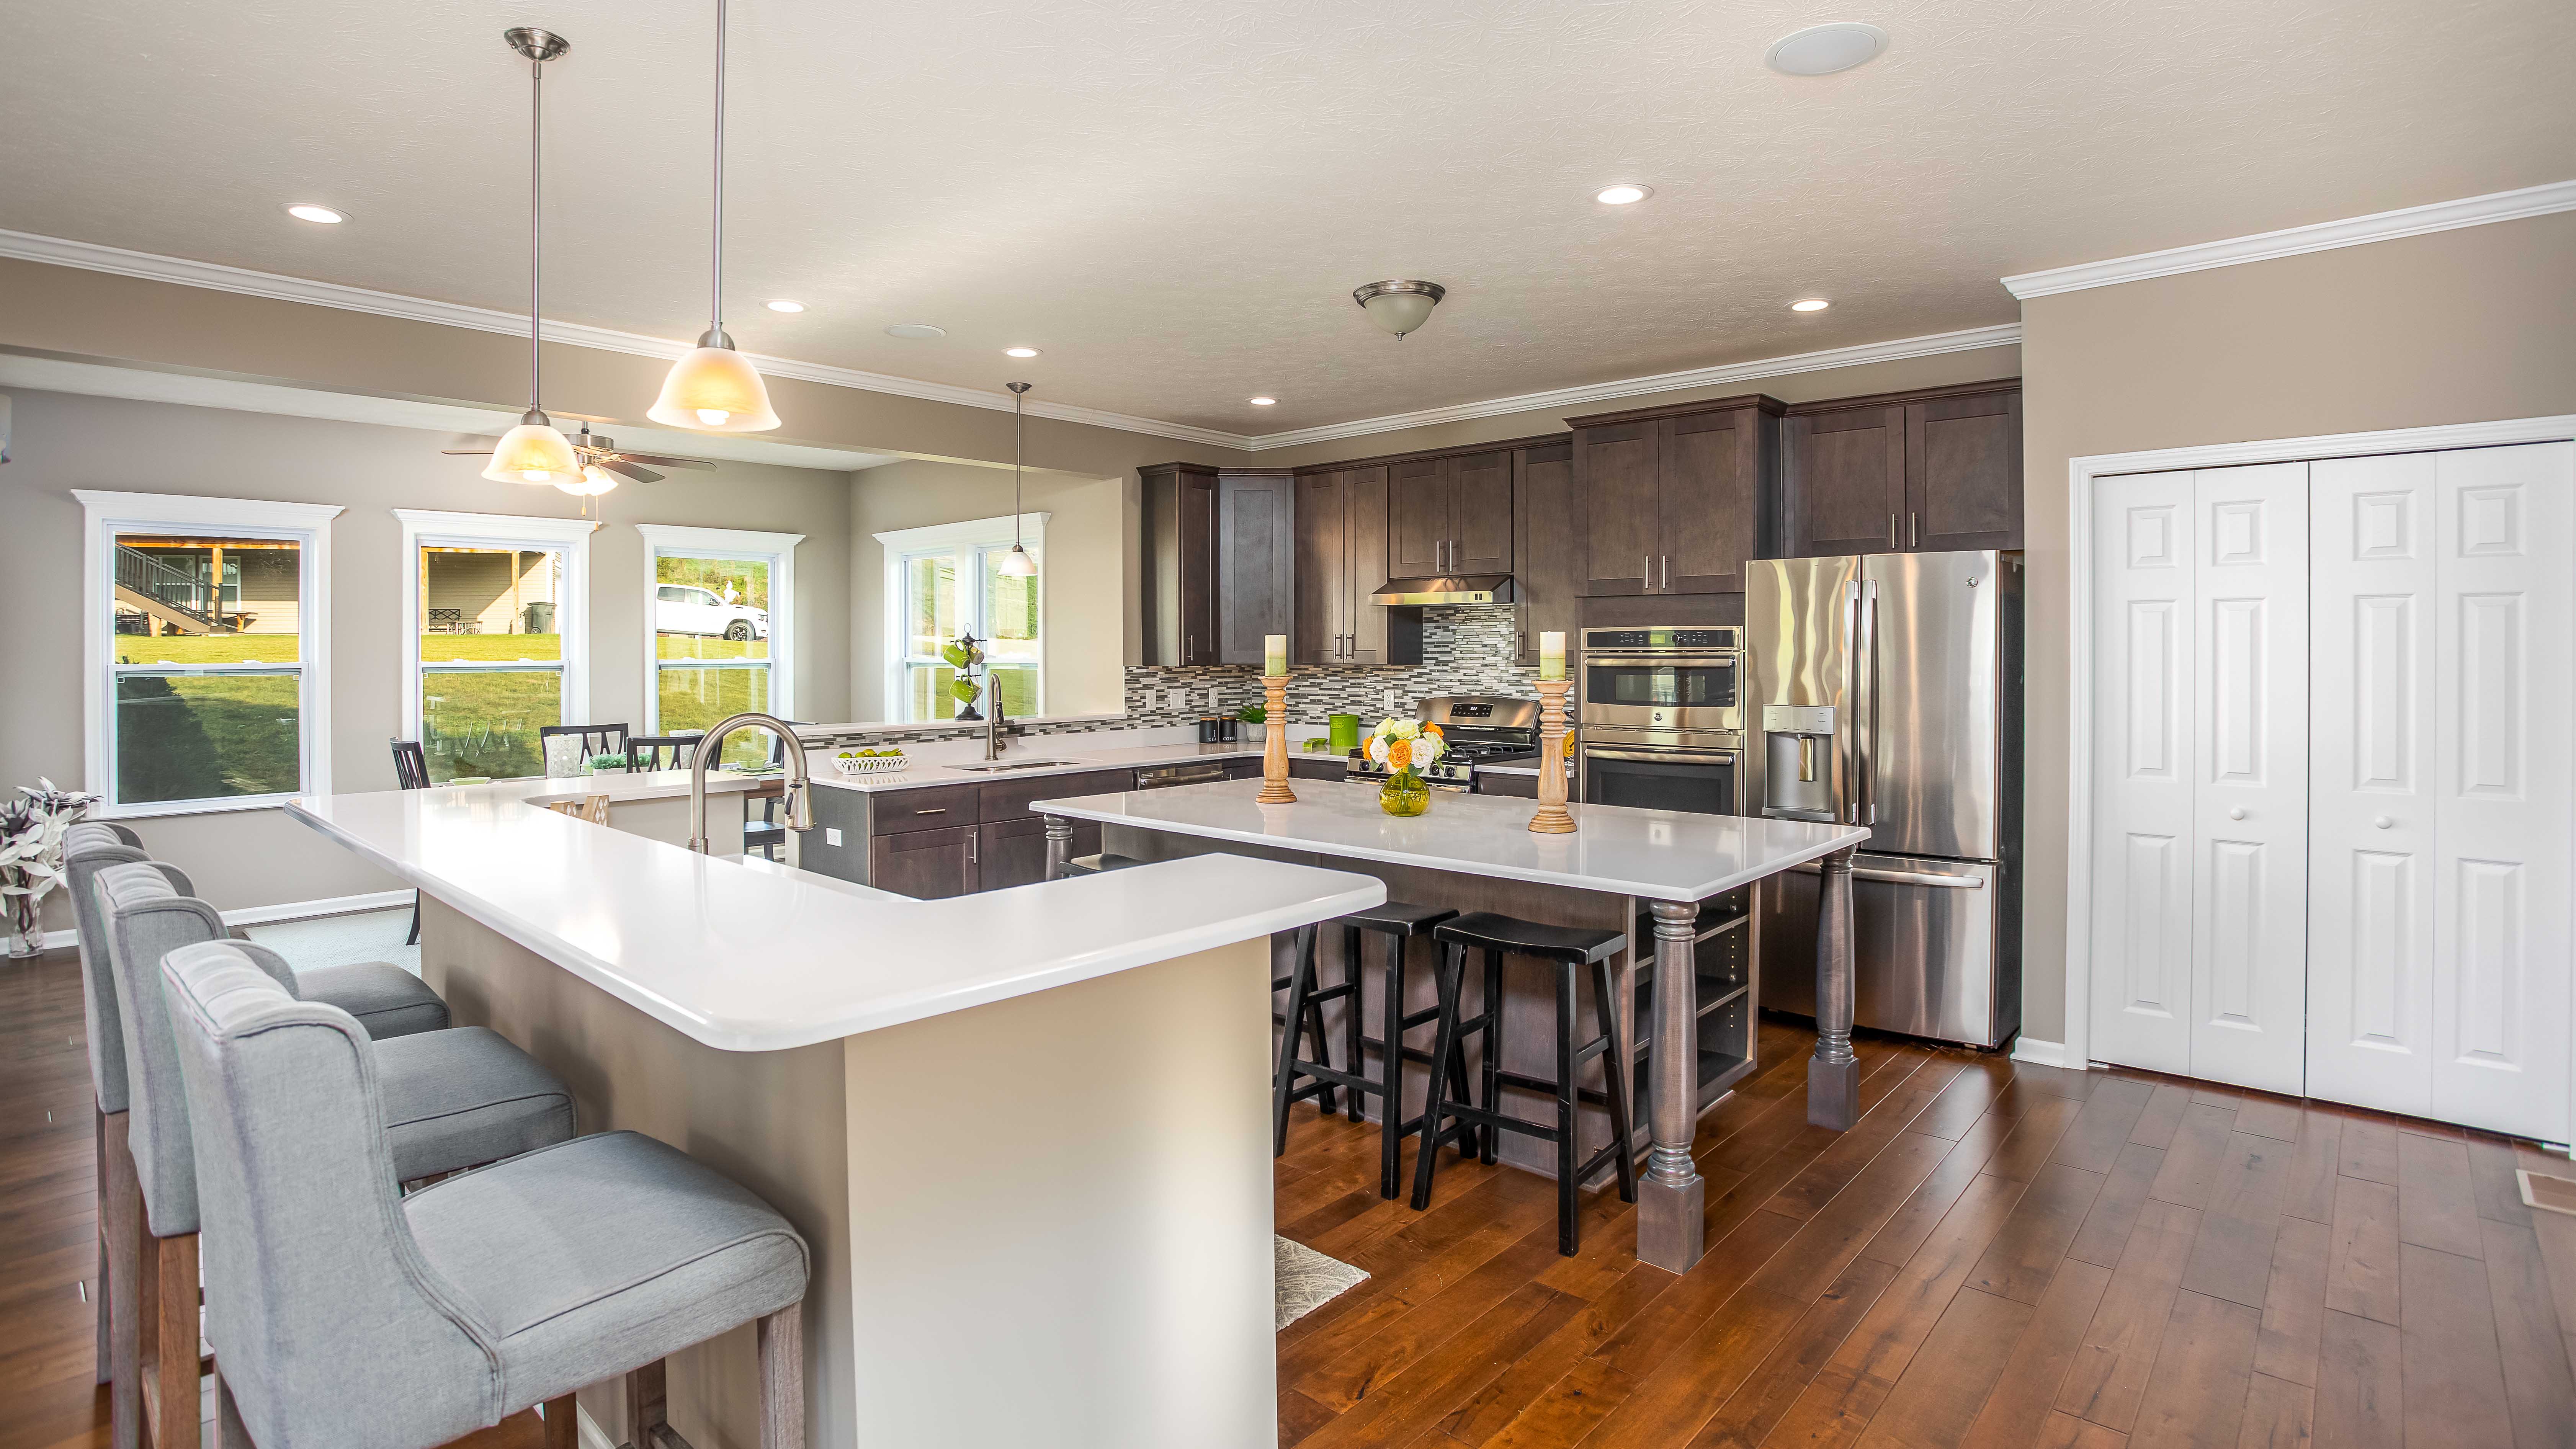 Modern kitchen of a new home in Pleasant Hills, PA